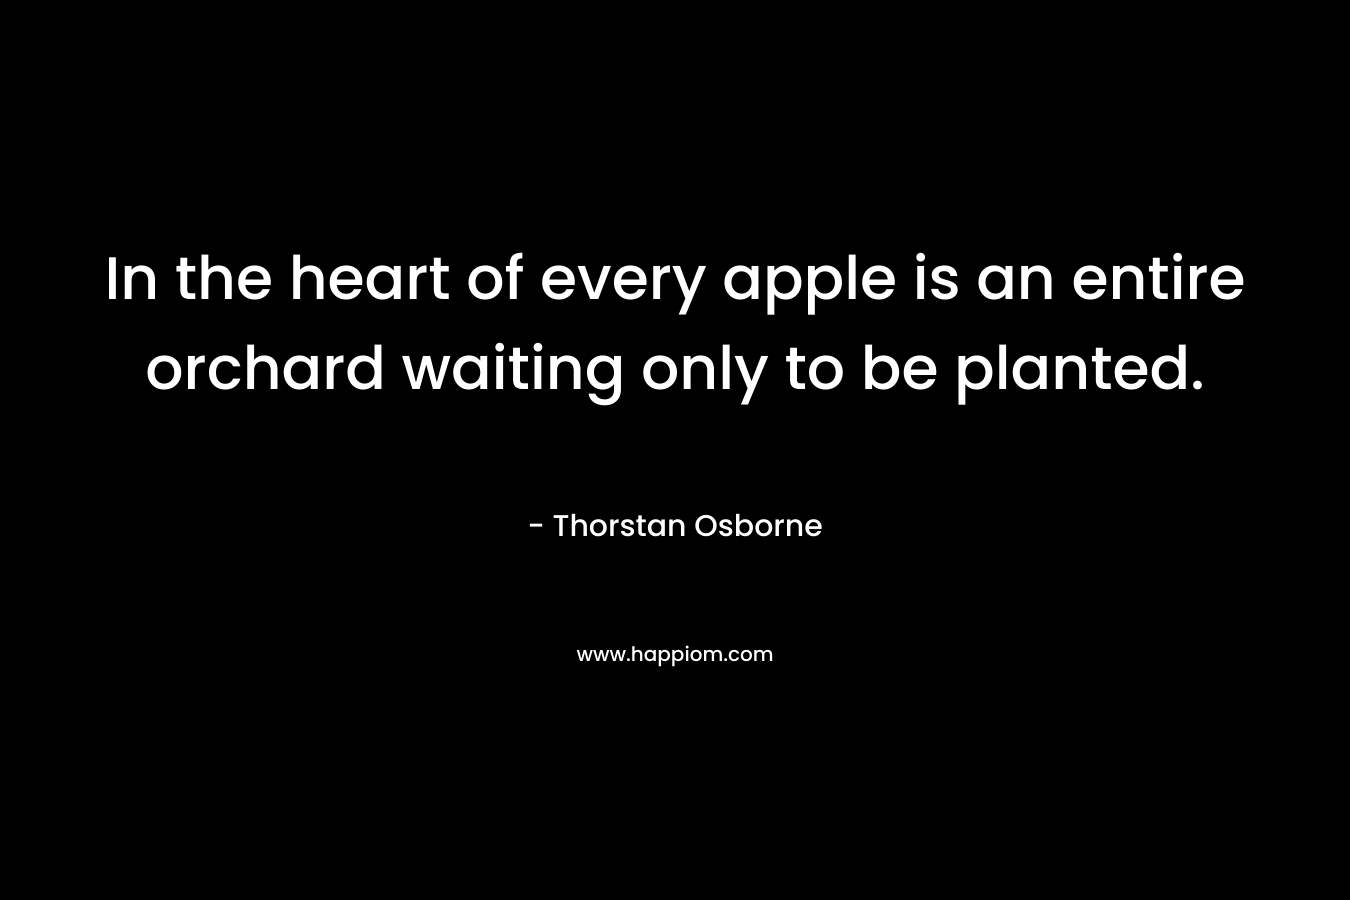 In the heart of every apple is an entire orchard waiting only to be planted. – Thorstan Osborne